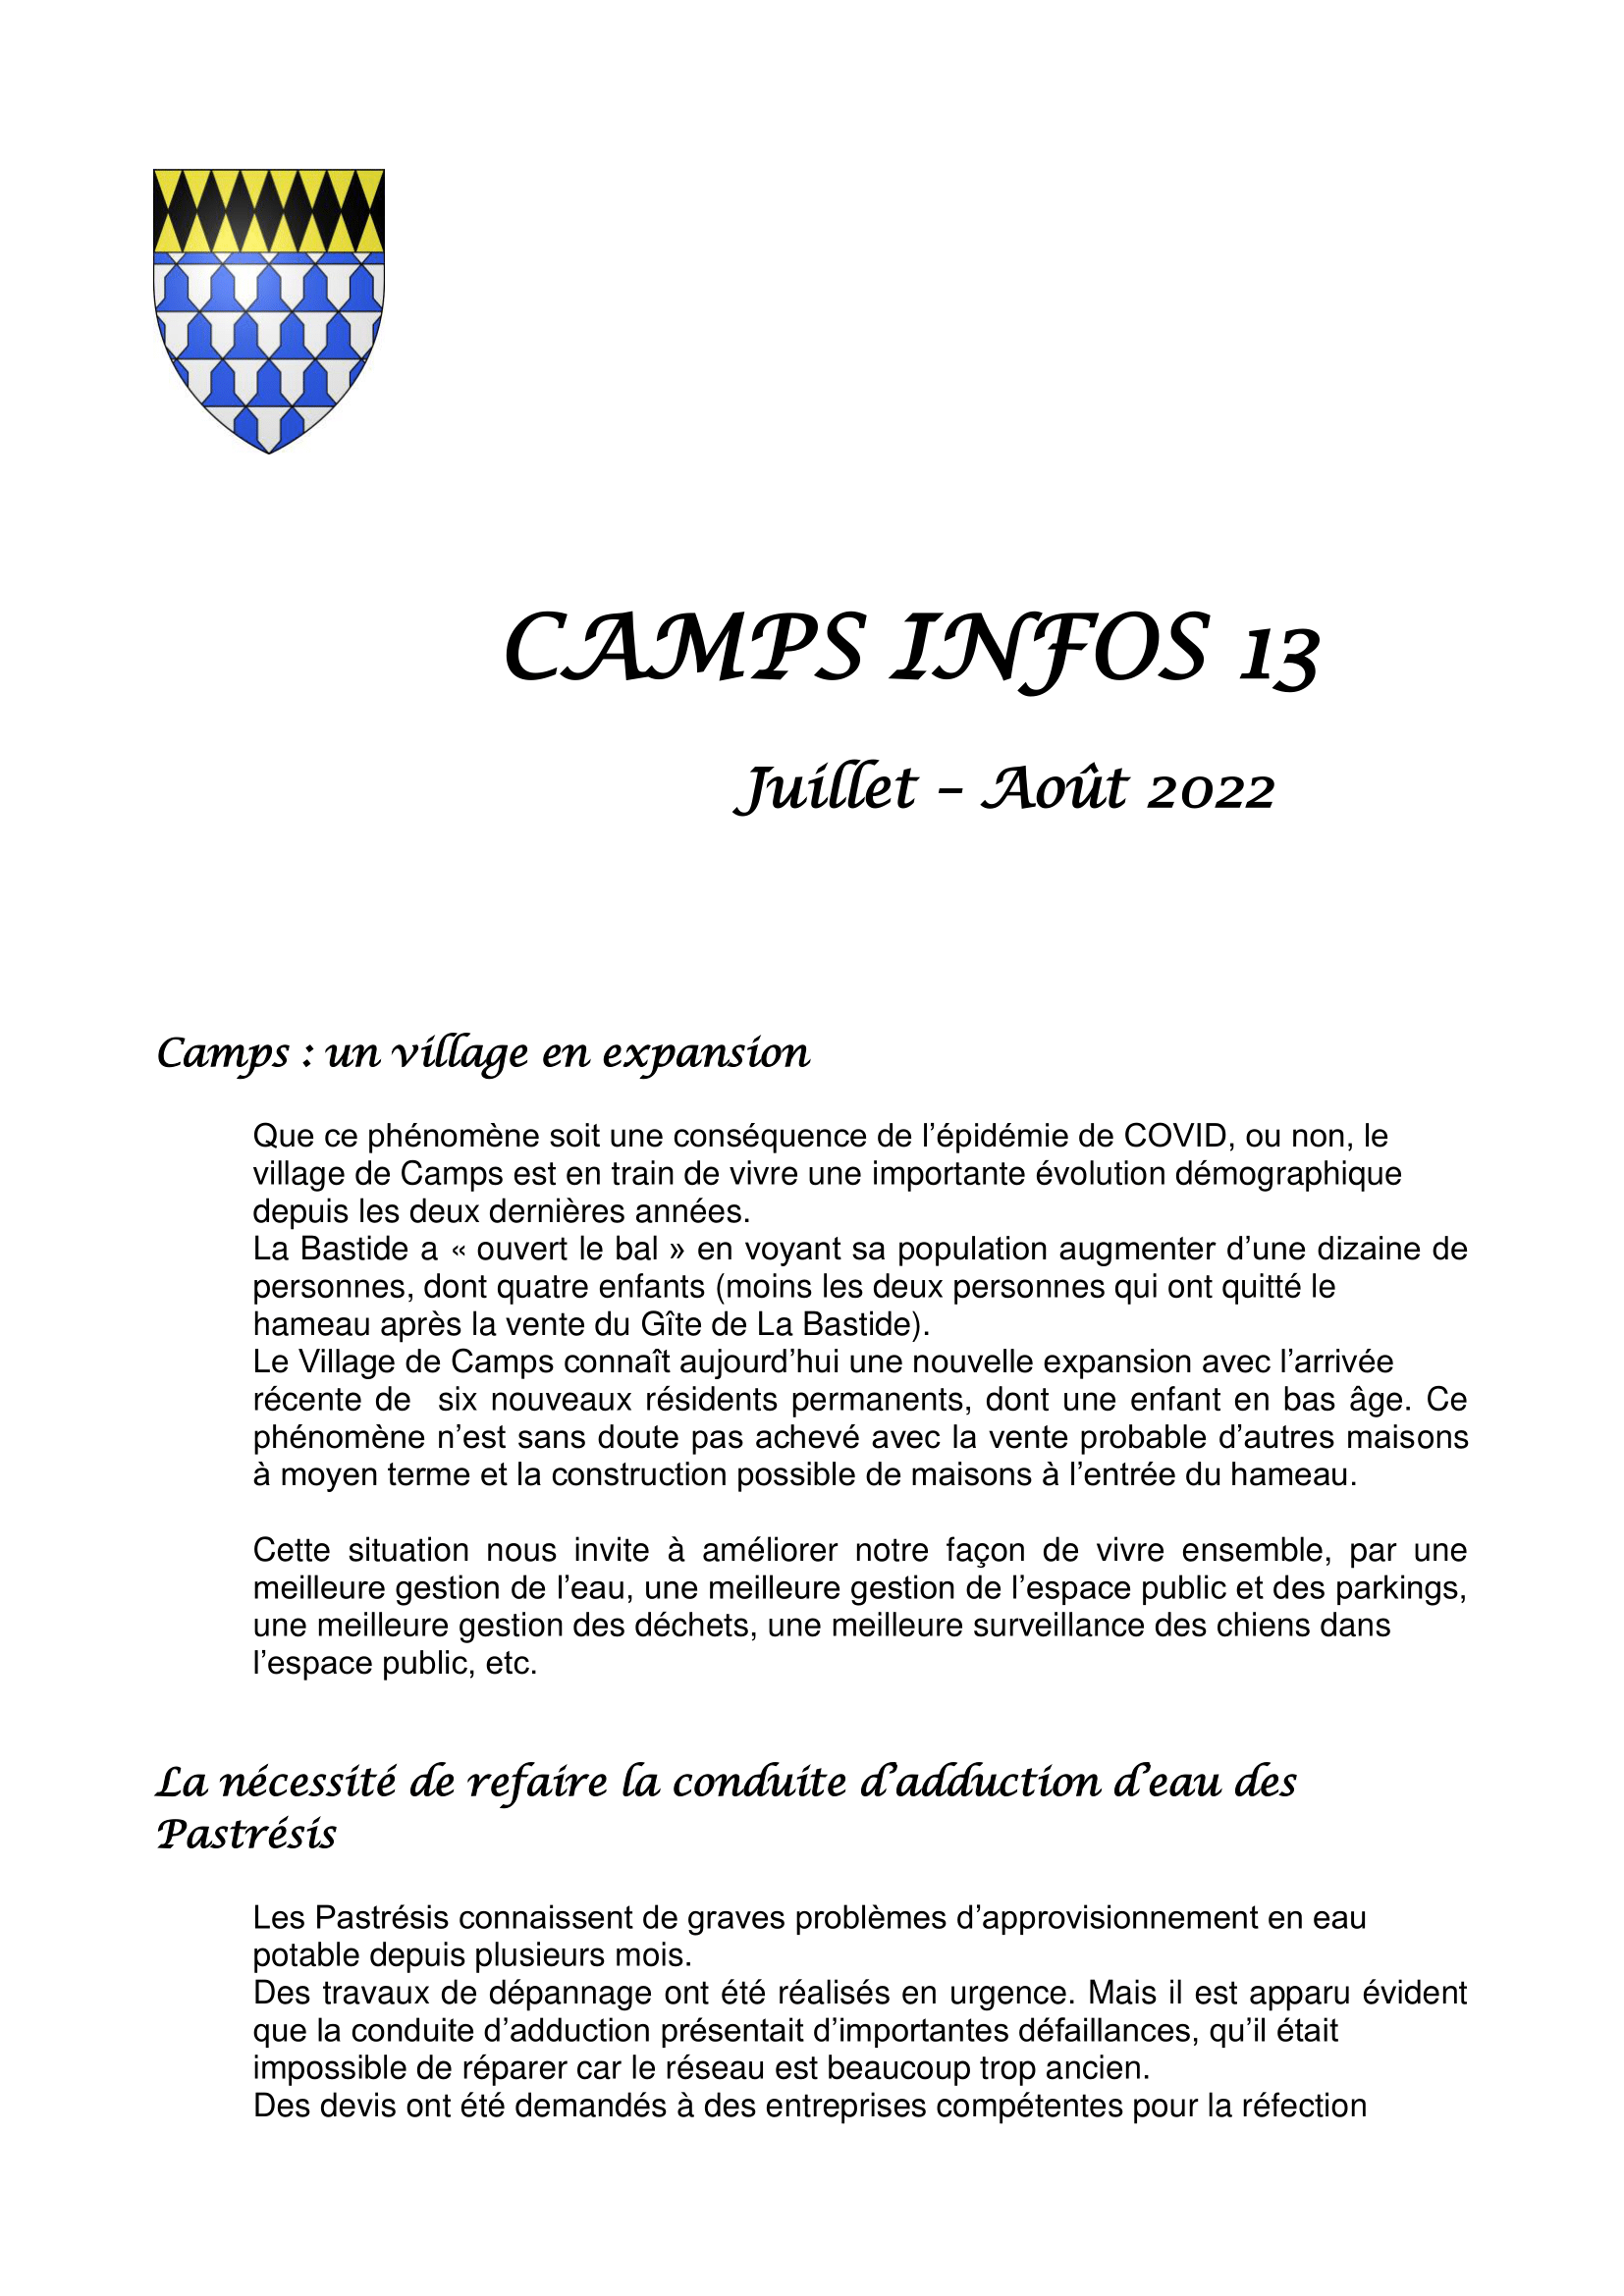 camps info 13